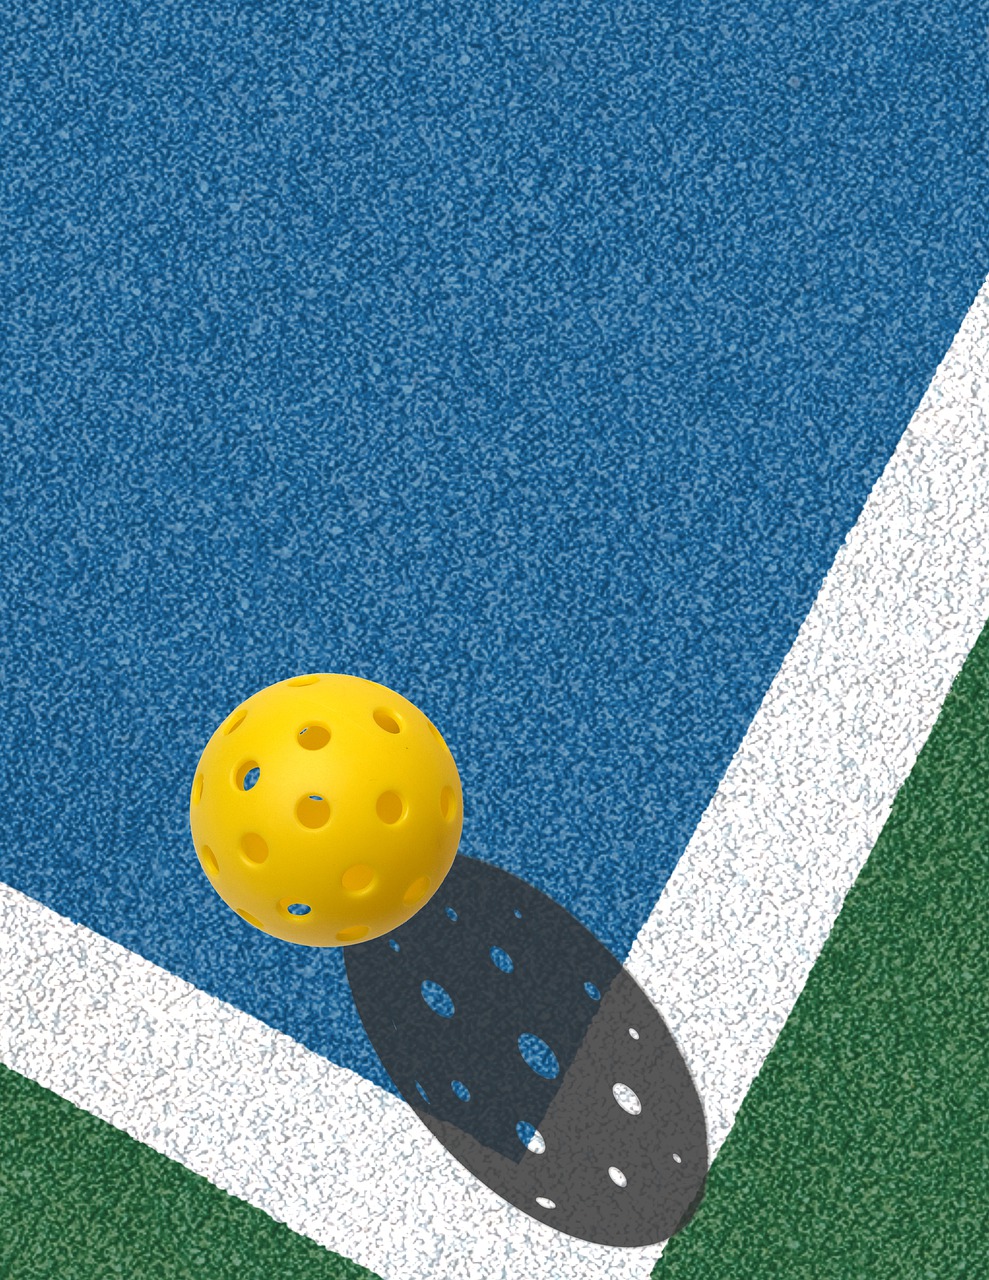 First Exclusive Outdoor Pickleball Court Coming To Frederick